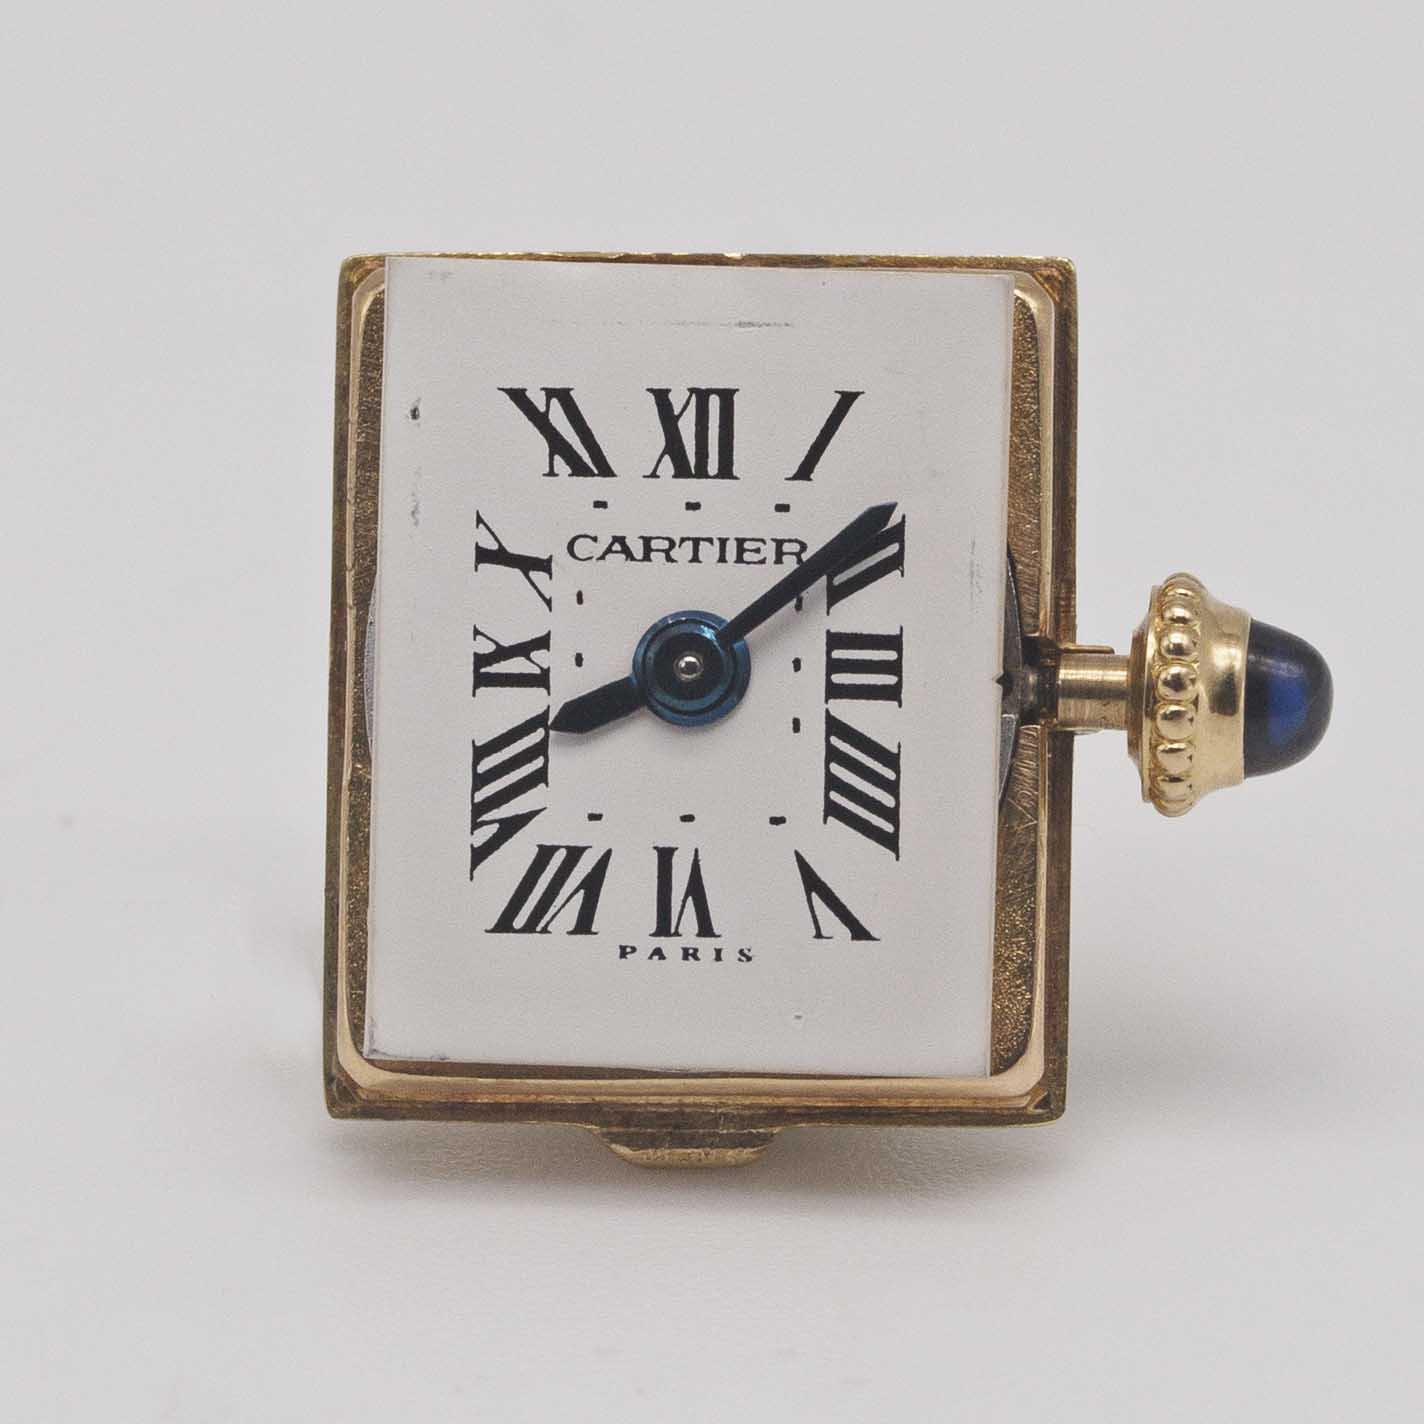 A LADIES 18K SOLID GOLD CARTIER PARIS "MINI" TANK WRIST WATCH CIRCA 1970s, WITH MANUAL WIND CAL. 845 - Image 8 of 11